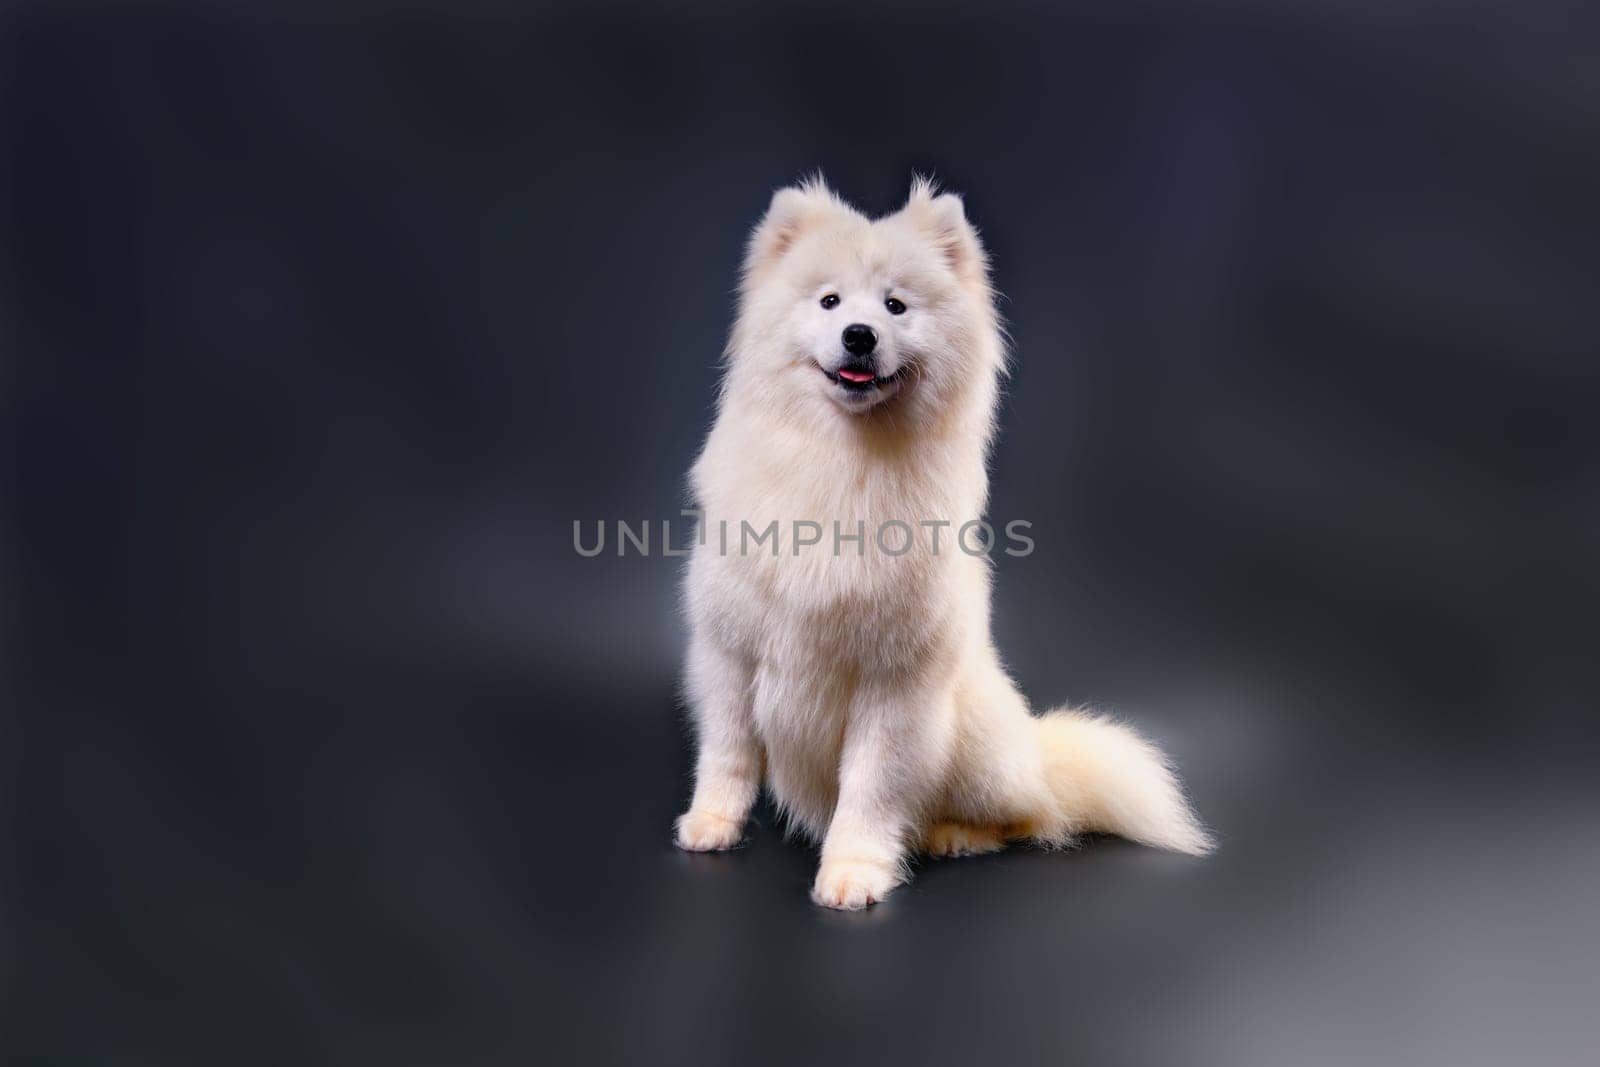 A white Samoyed dog after express molting, washing and drying sitting on a black background with bright spots of light